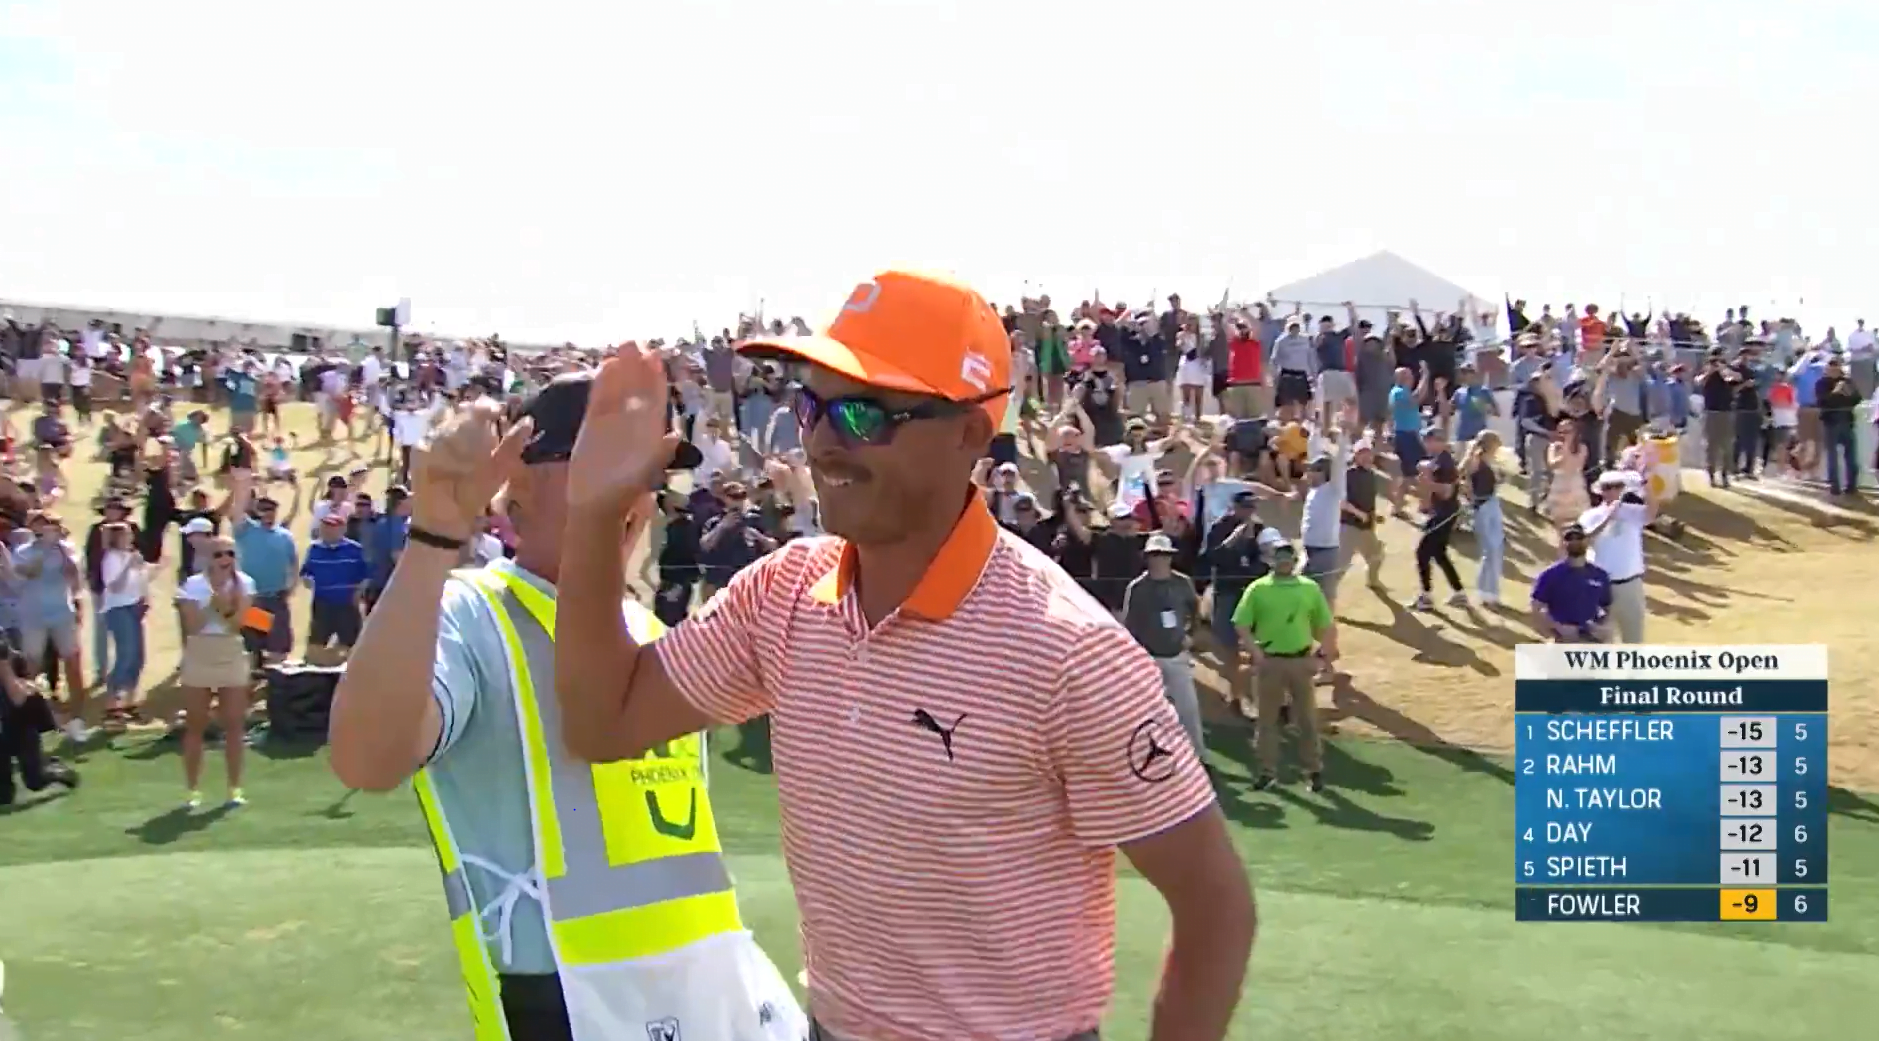 Watch Rickie Fowler Drains an Impressive Hole-in-One on No